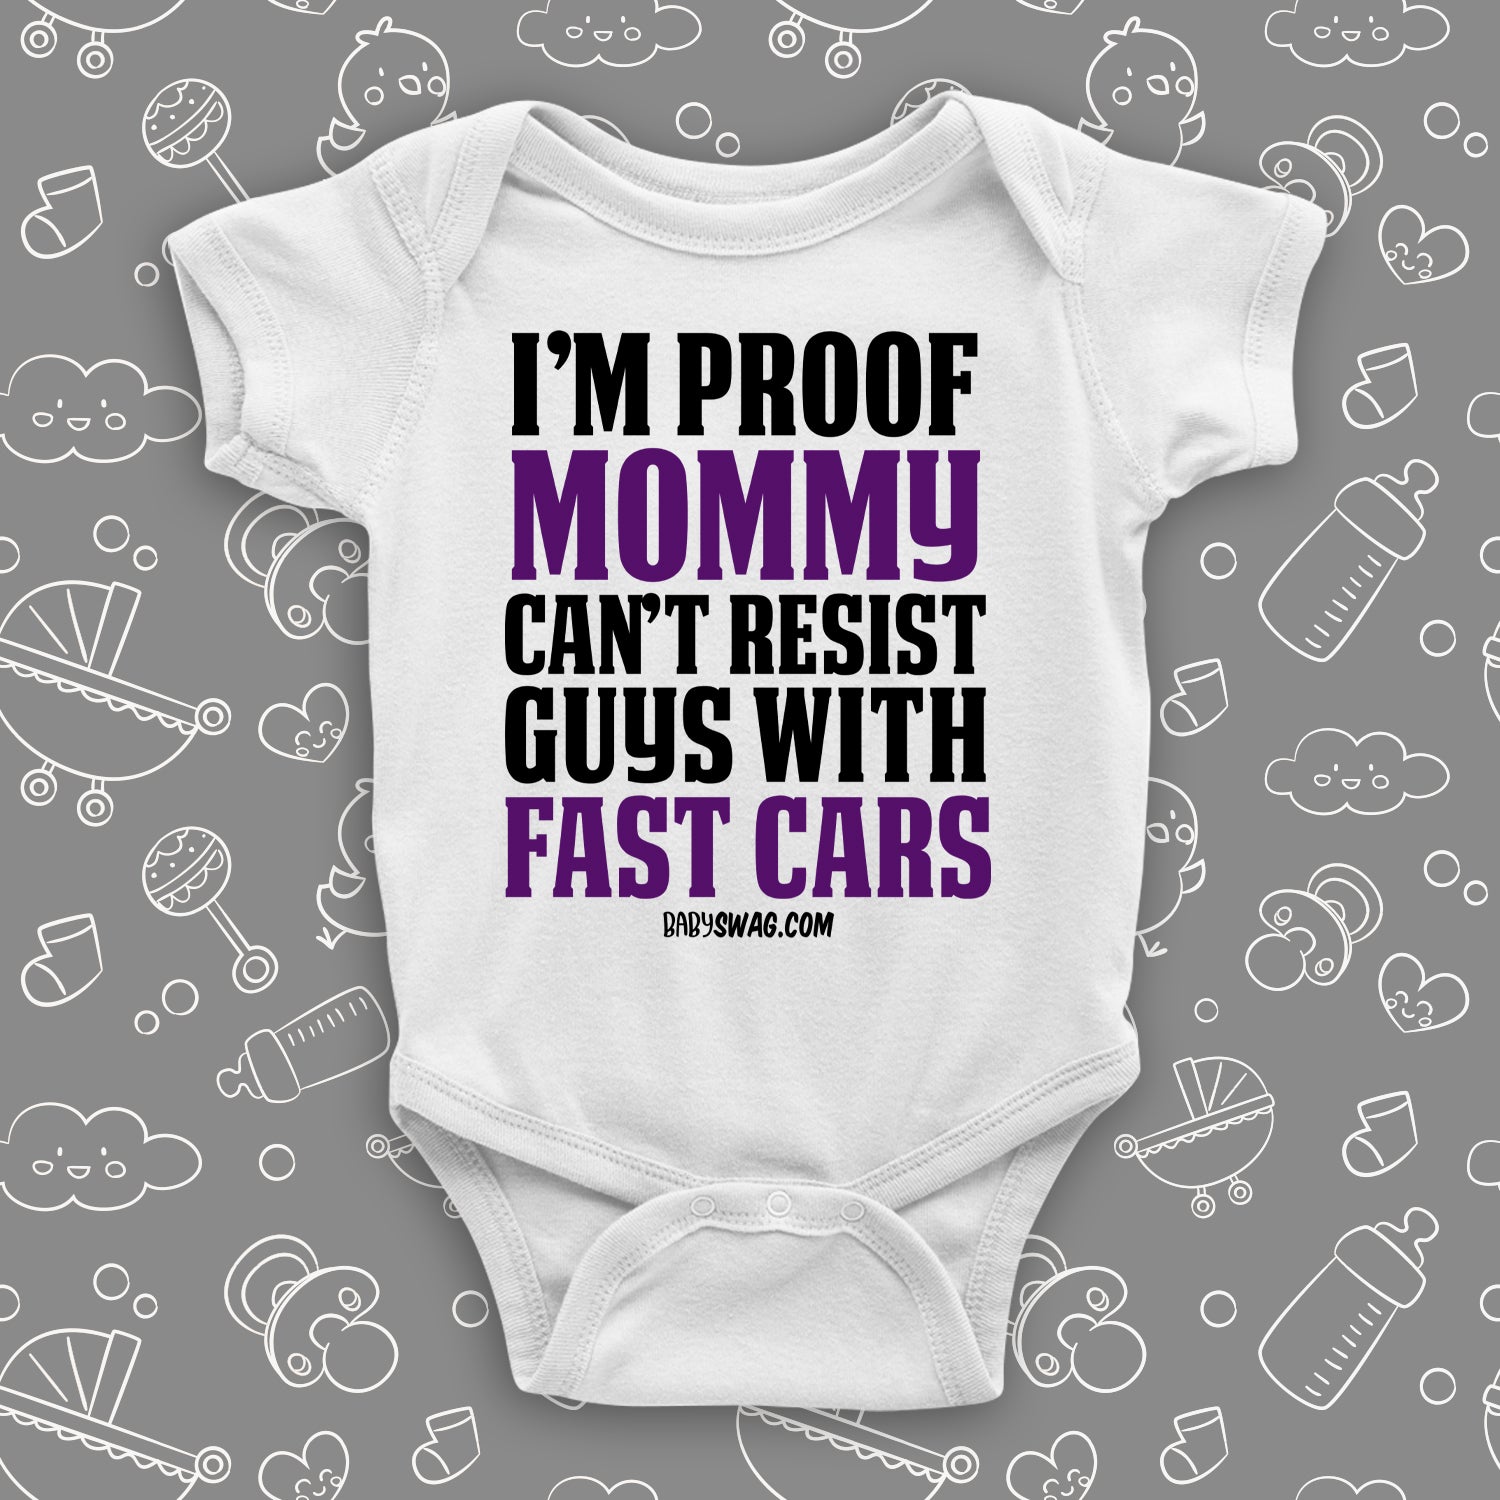 A white hilarious baby onesie sayng "I'm Proof Mommy Can't Resist Guys With Fast Cars"